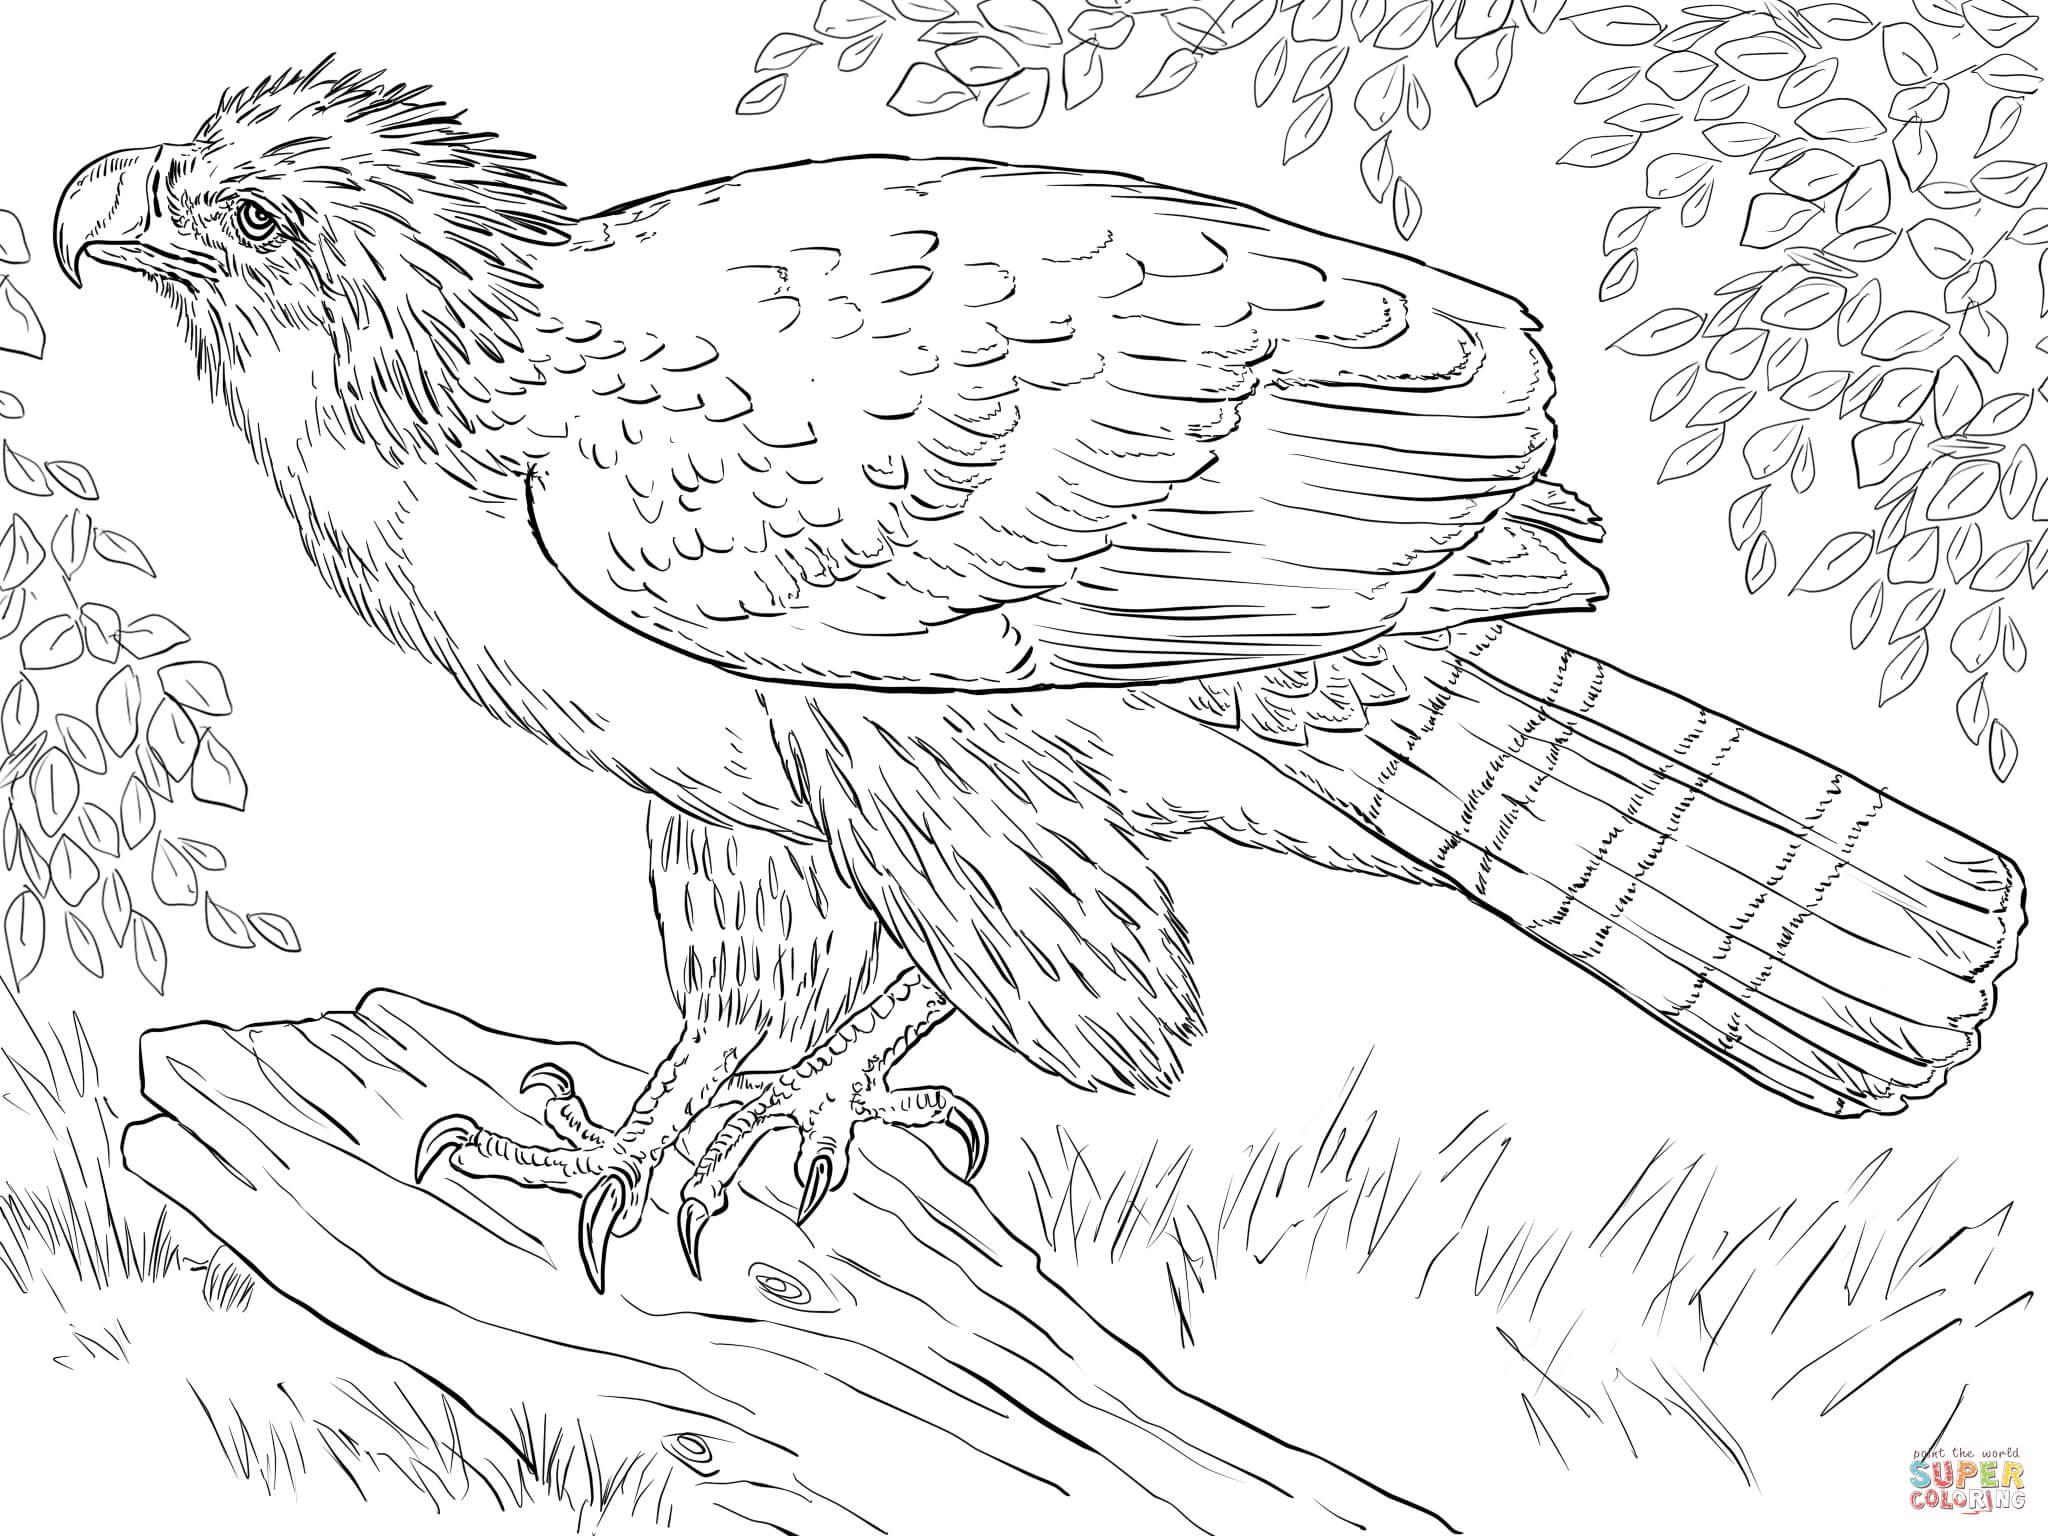 Phillipine Eagle coloring #10, Download drawings